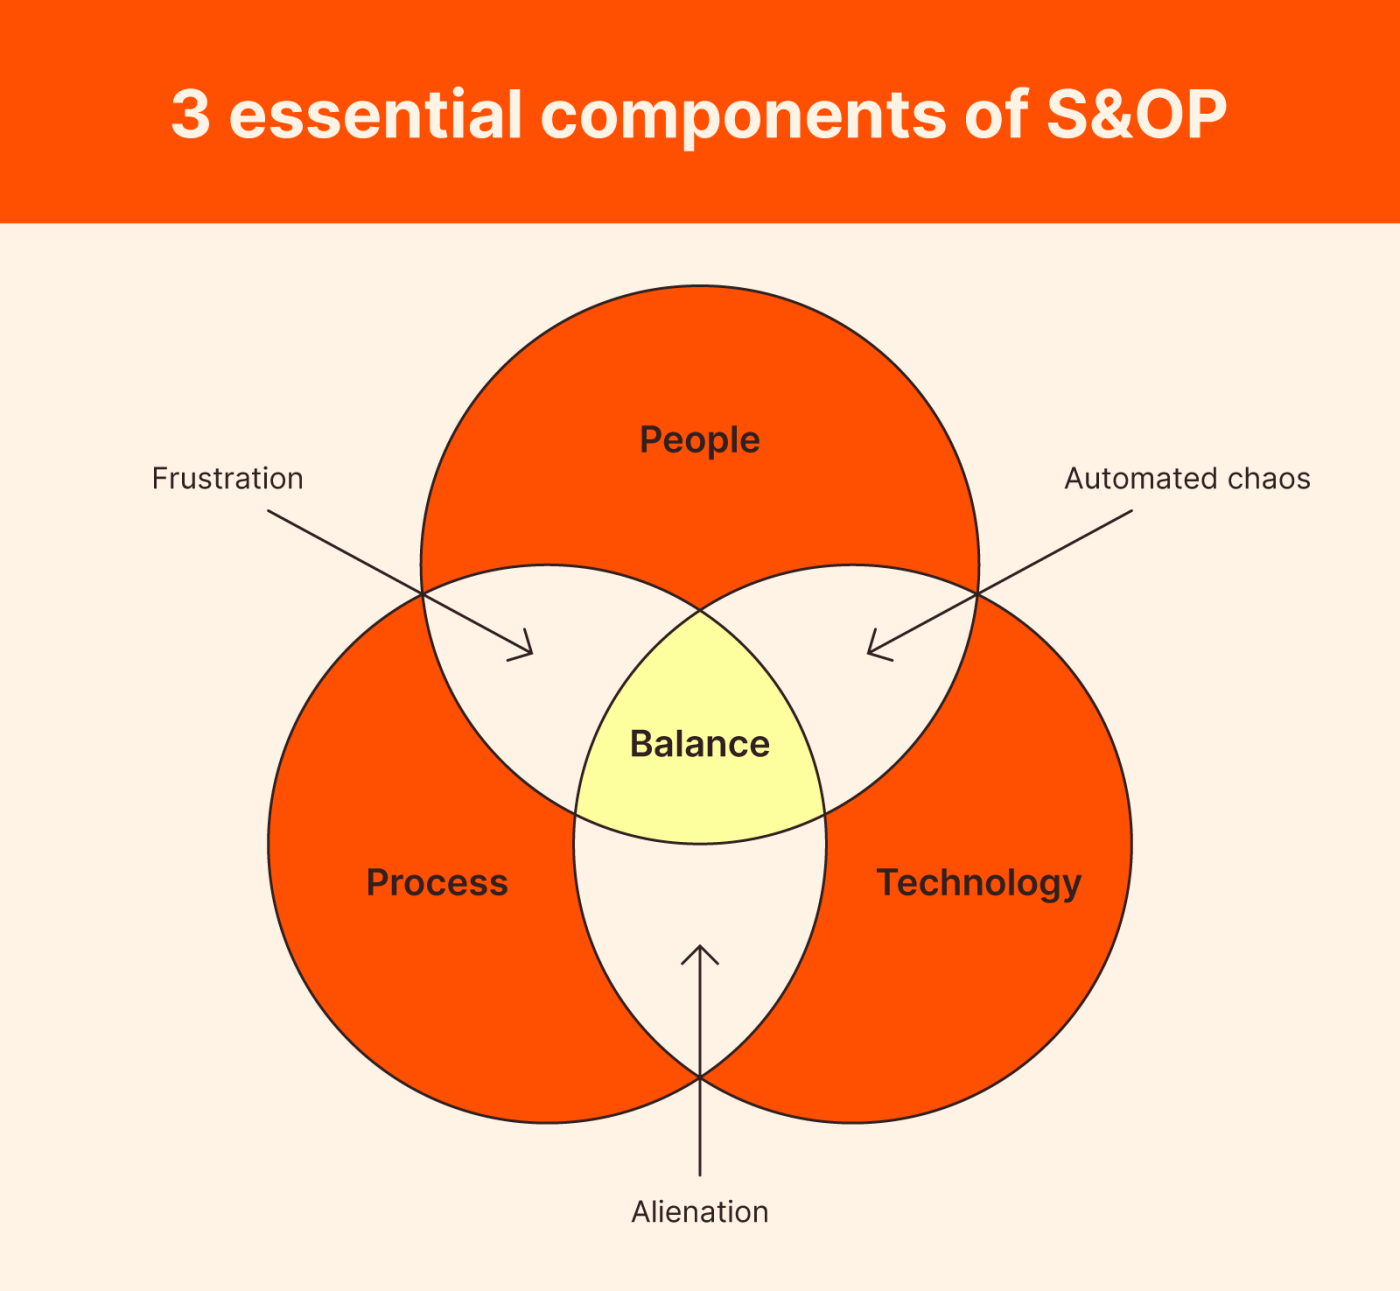 A three-circle Venn diagram showing the three essential components of S&OP: people, process, and technology